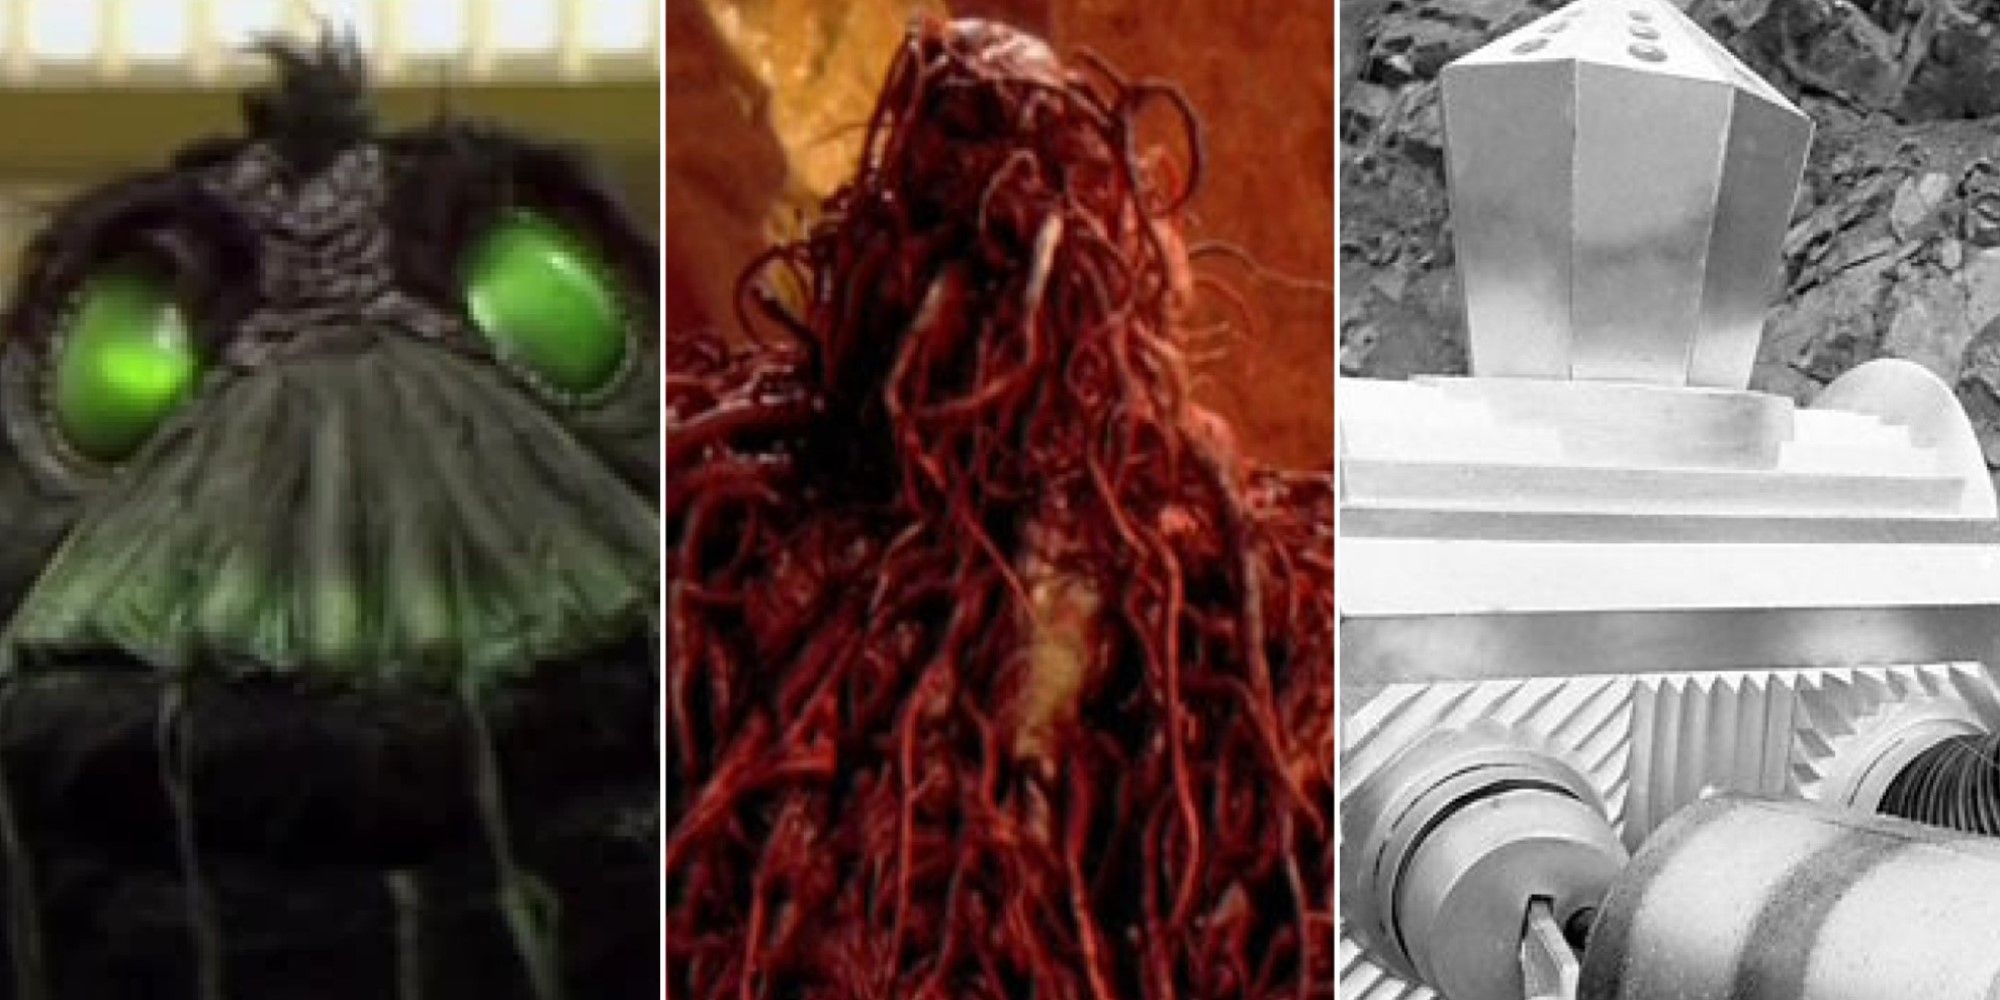 Images of three monsters from different episodes of the classic series of Doctor Who